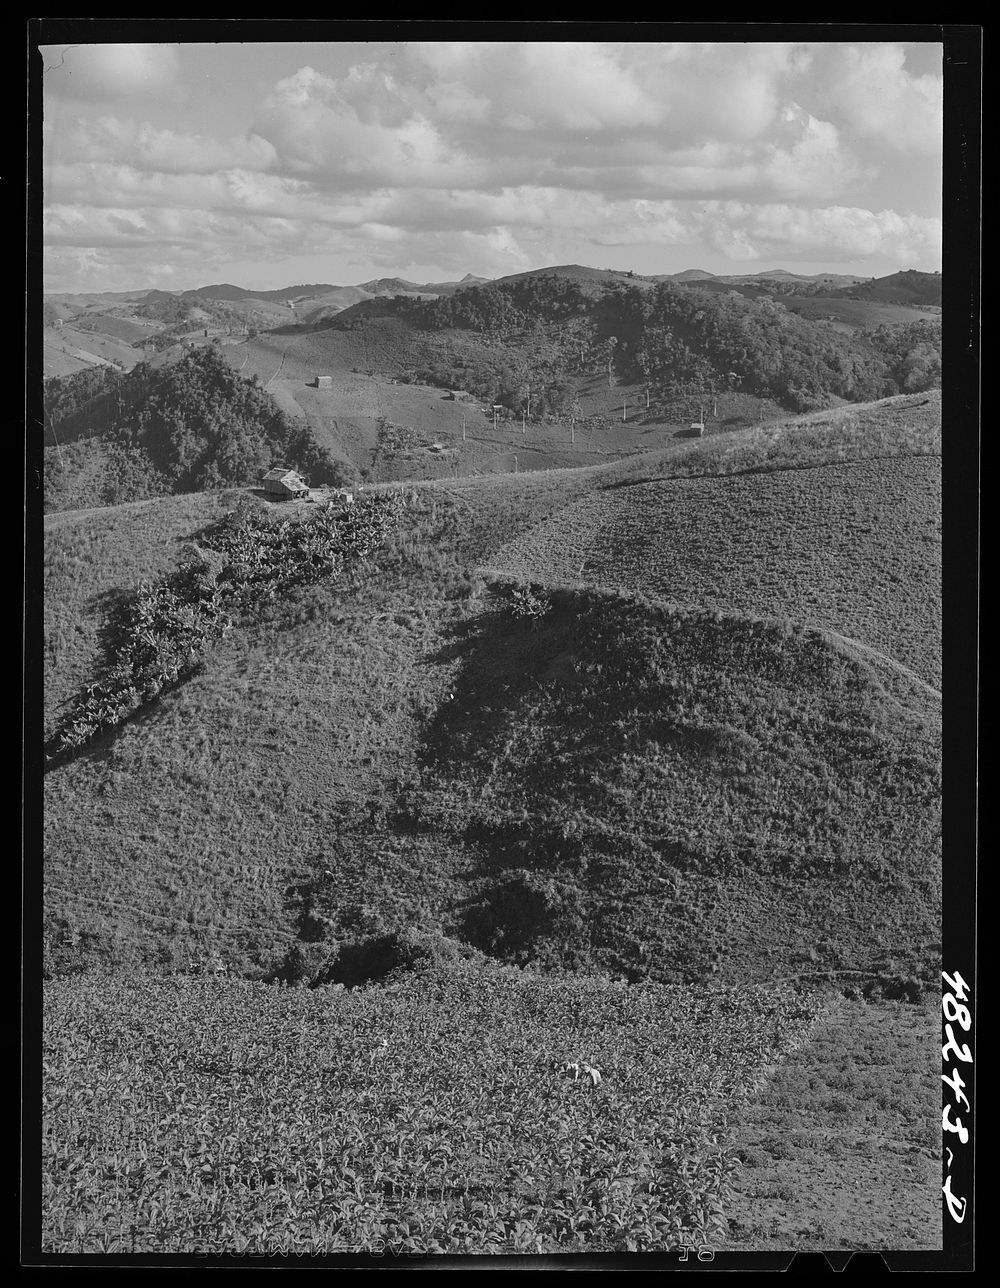 Barranquitas (vicinity), Puerto Rico. Landscape in the tobacco country. Sourced from the Library of Congress.